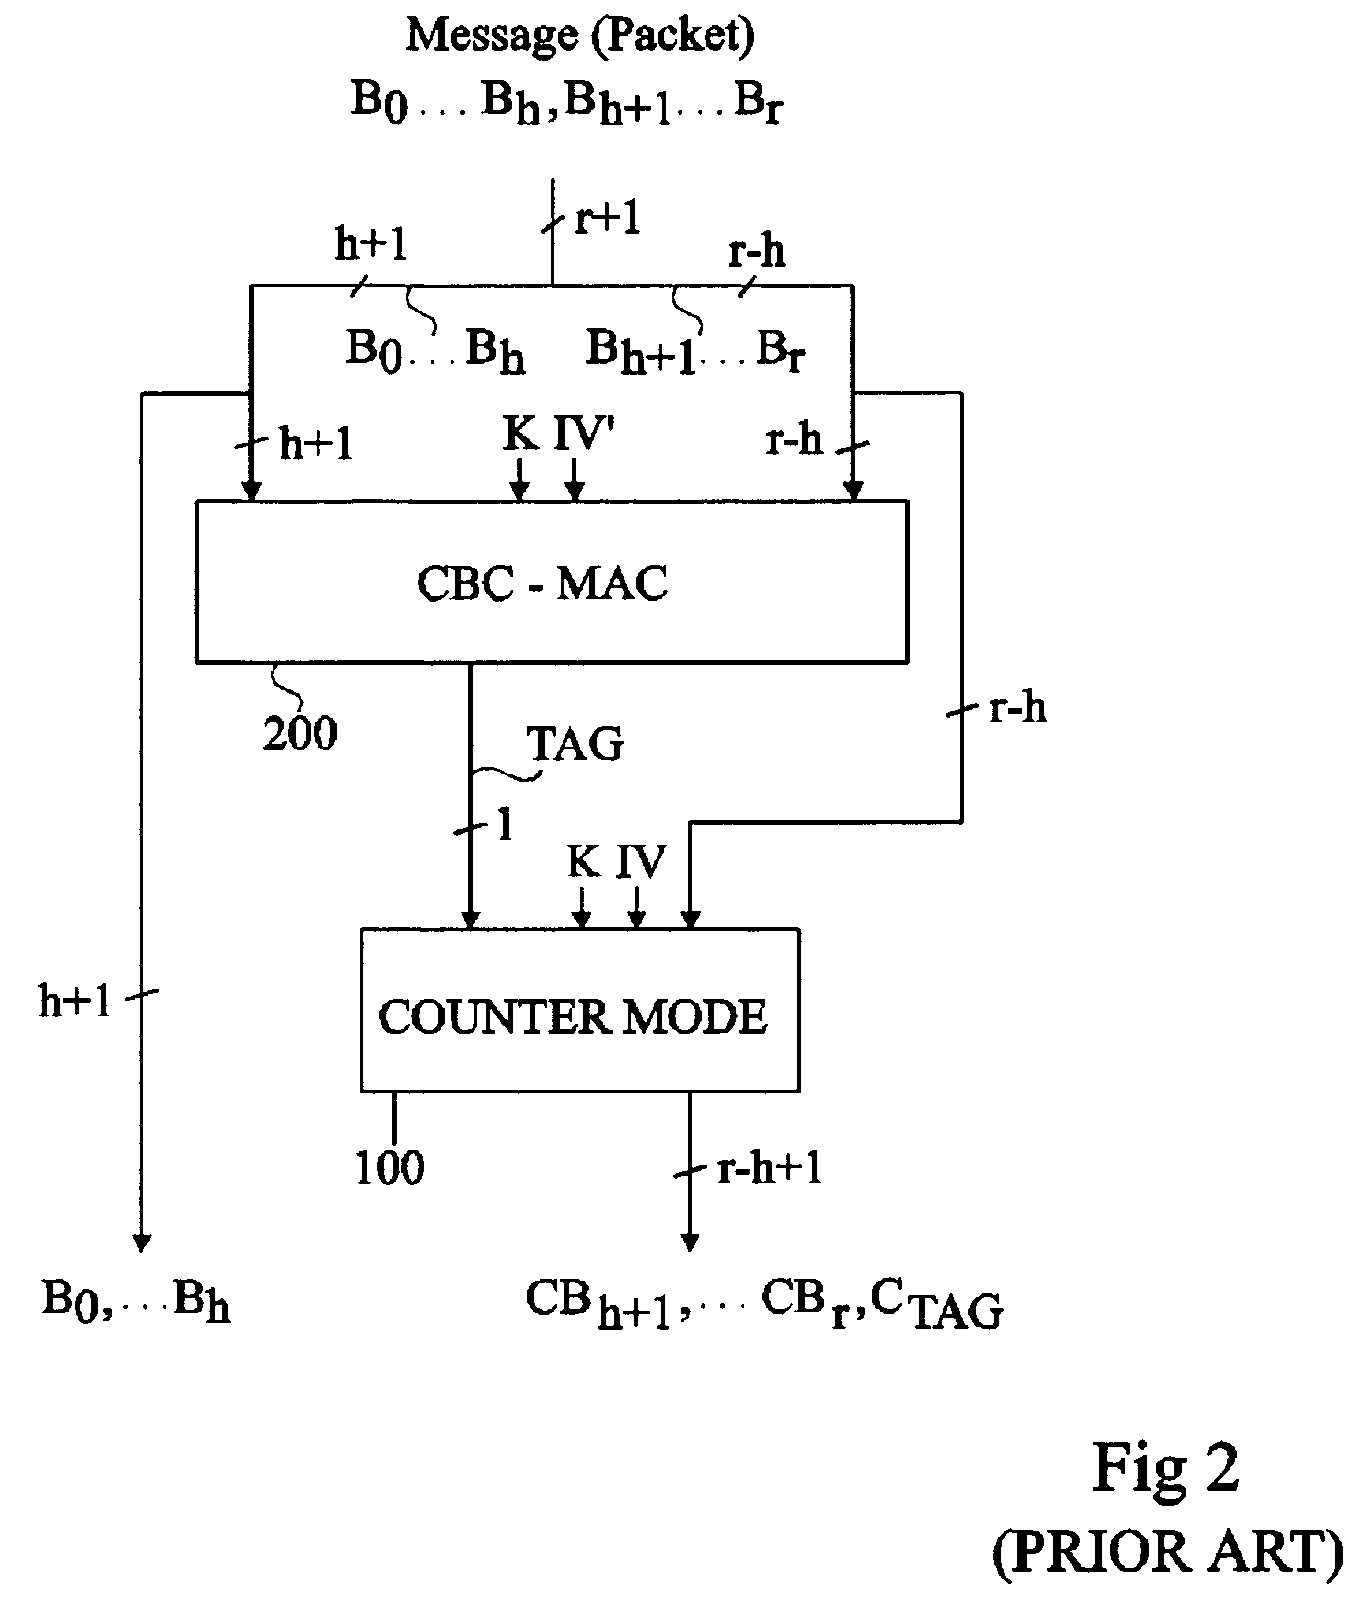 AES encryption circuitry with CCM